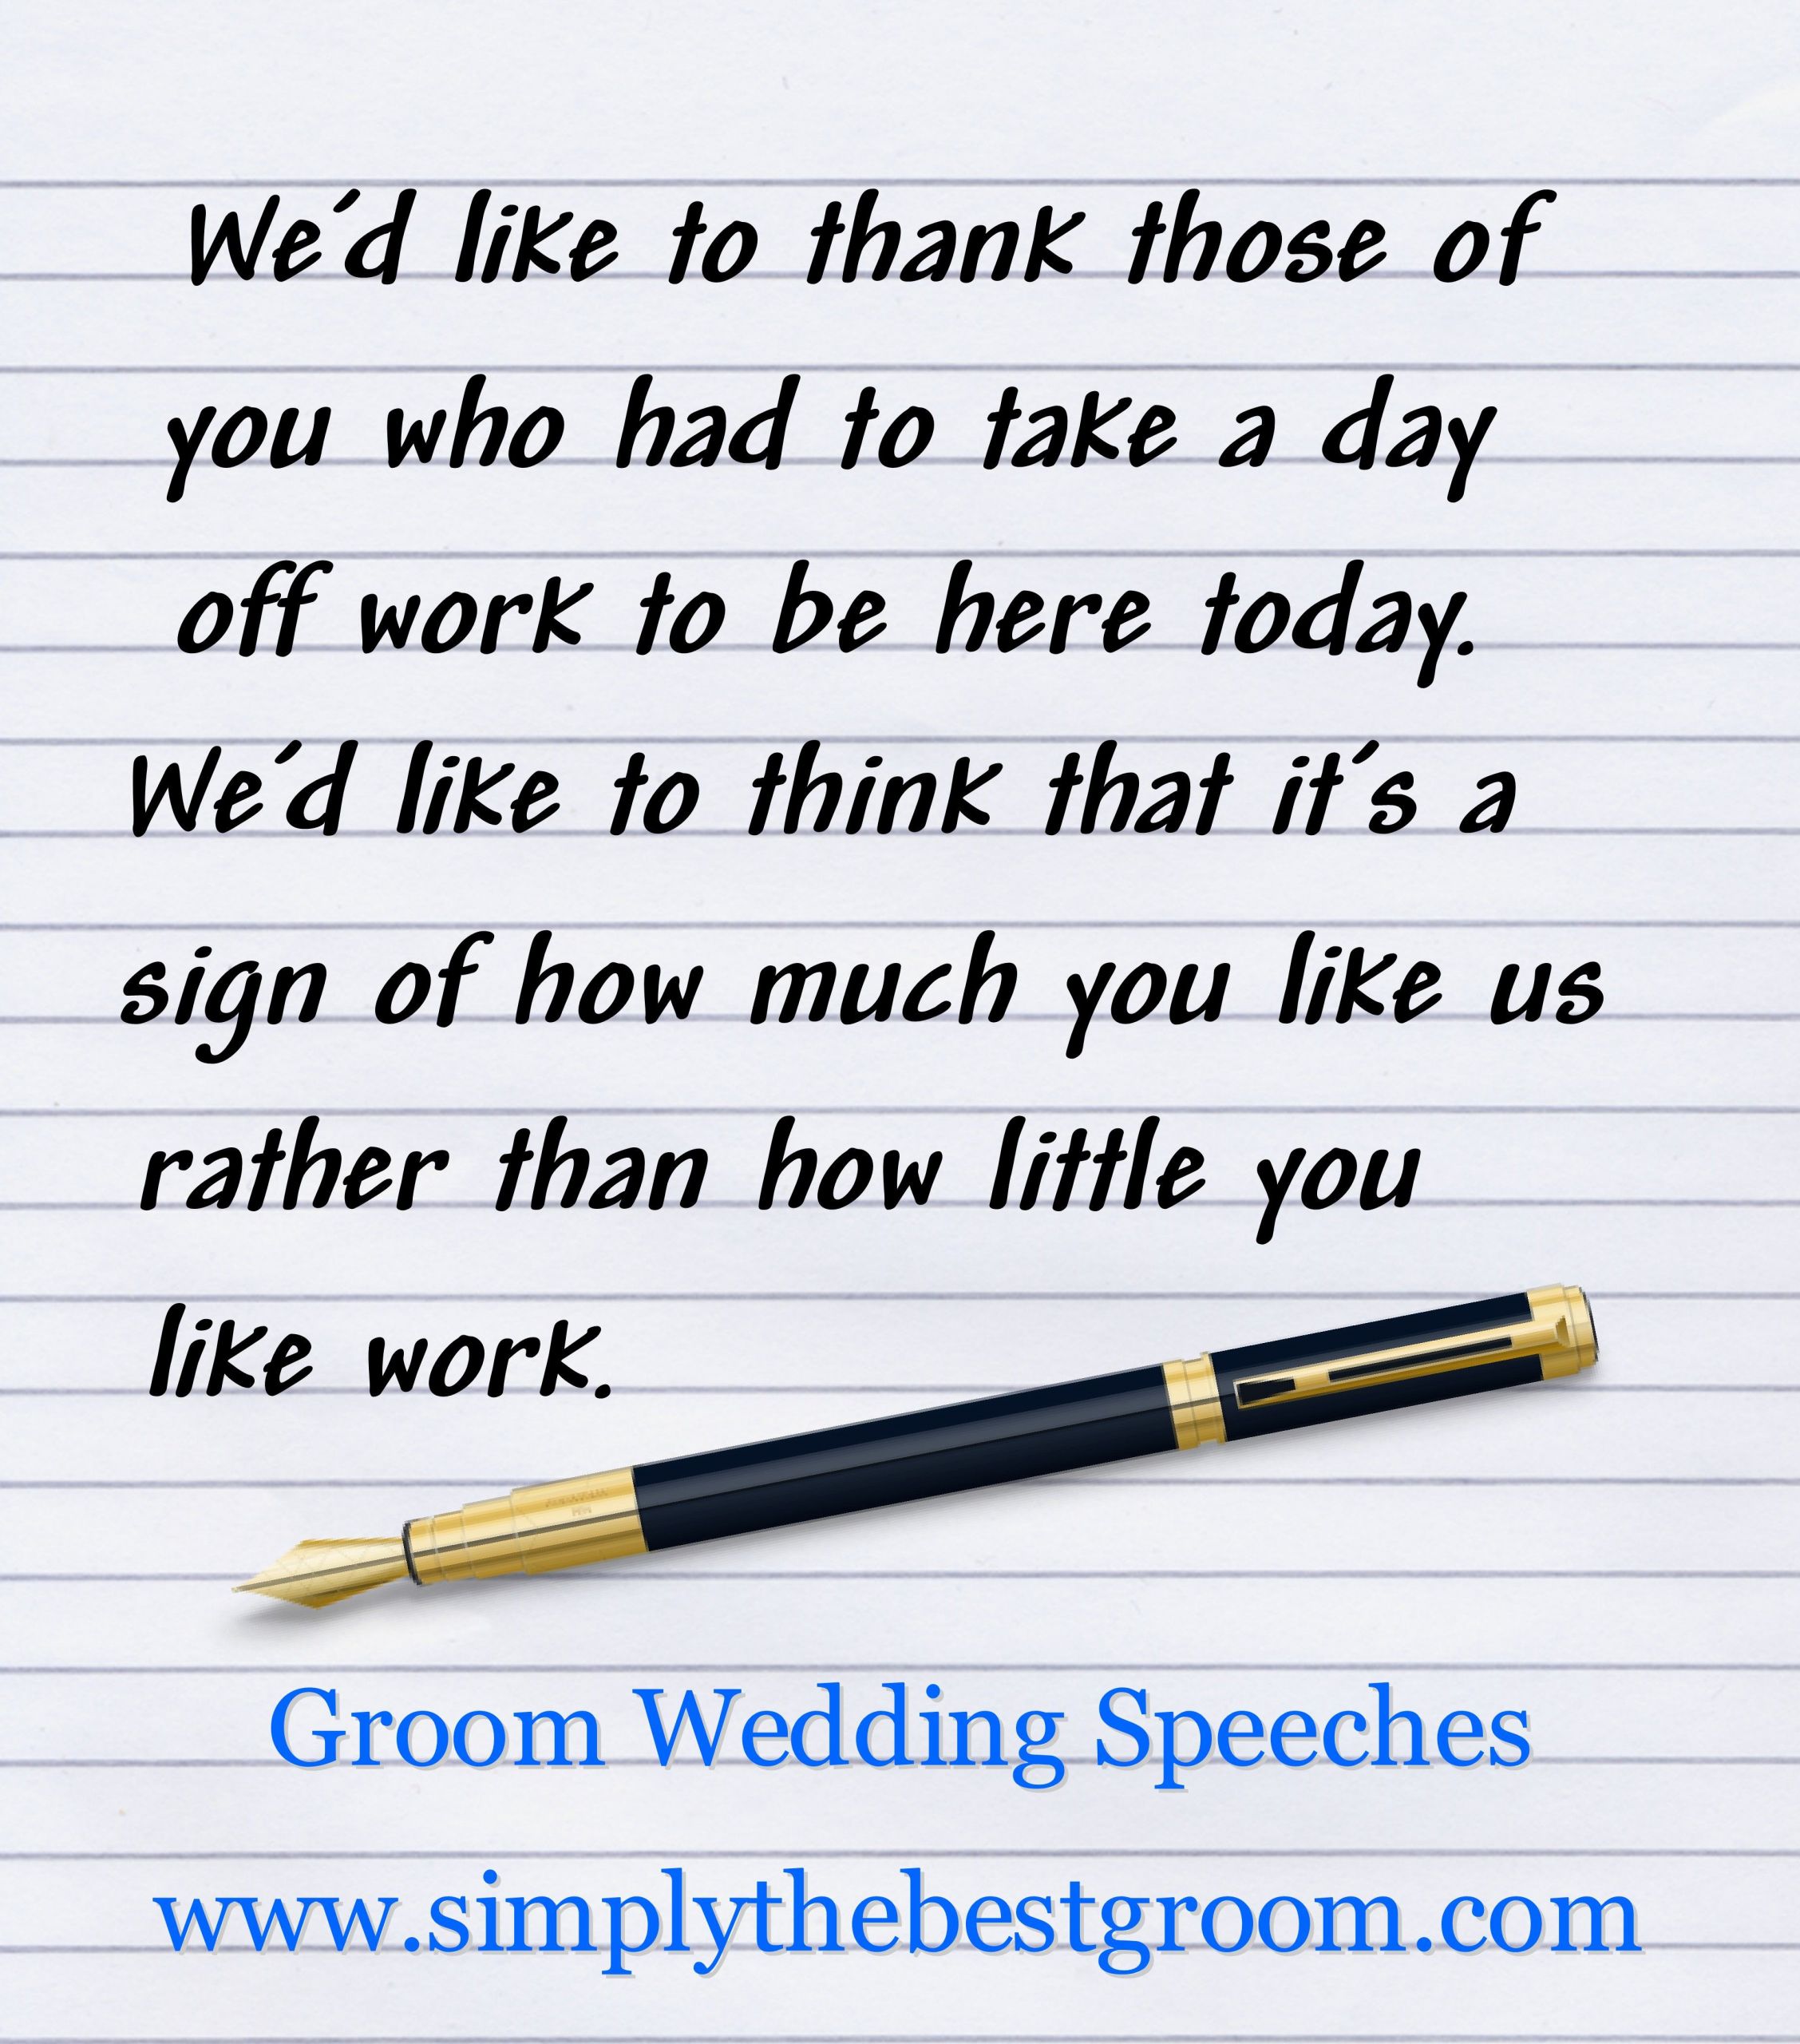 Mother Of The Groom Speech Quotes
 Building the perfect Groom s Speech